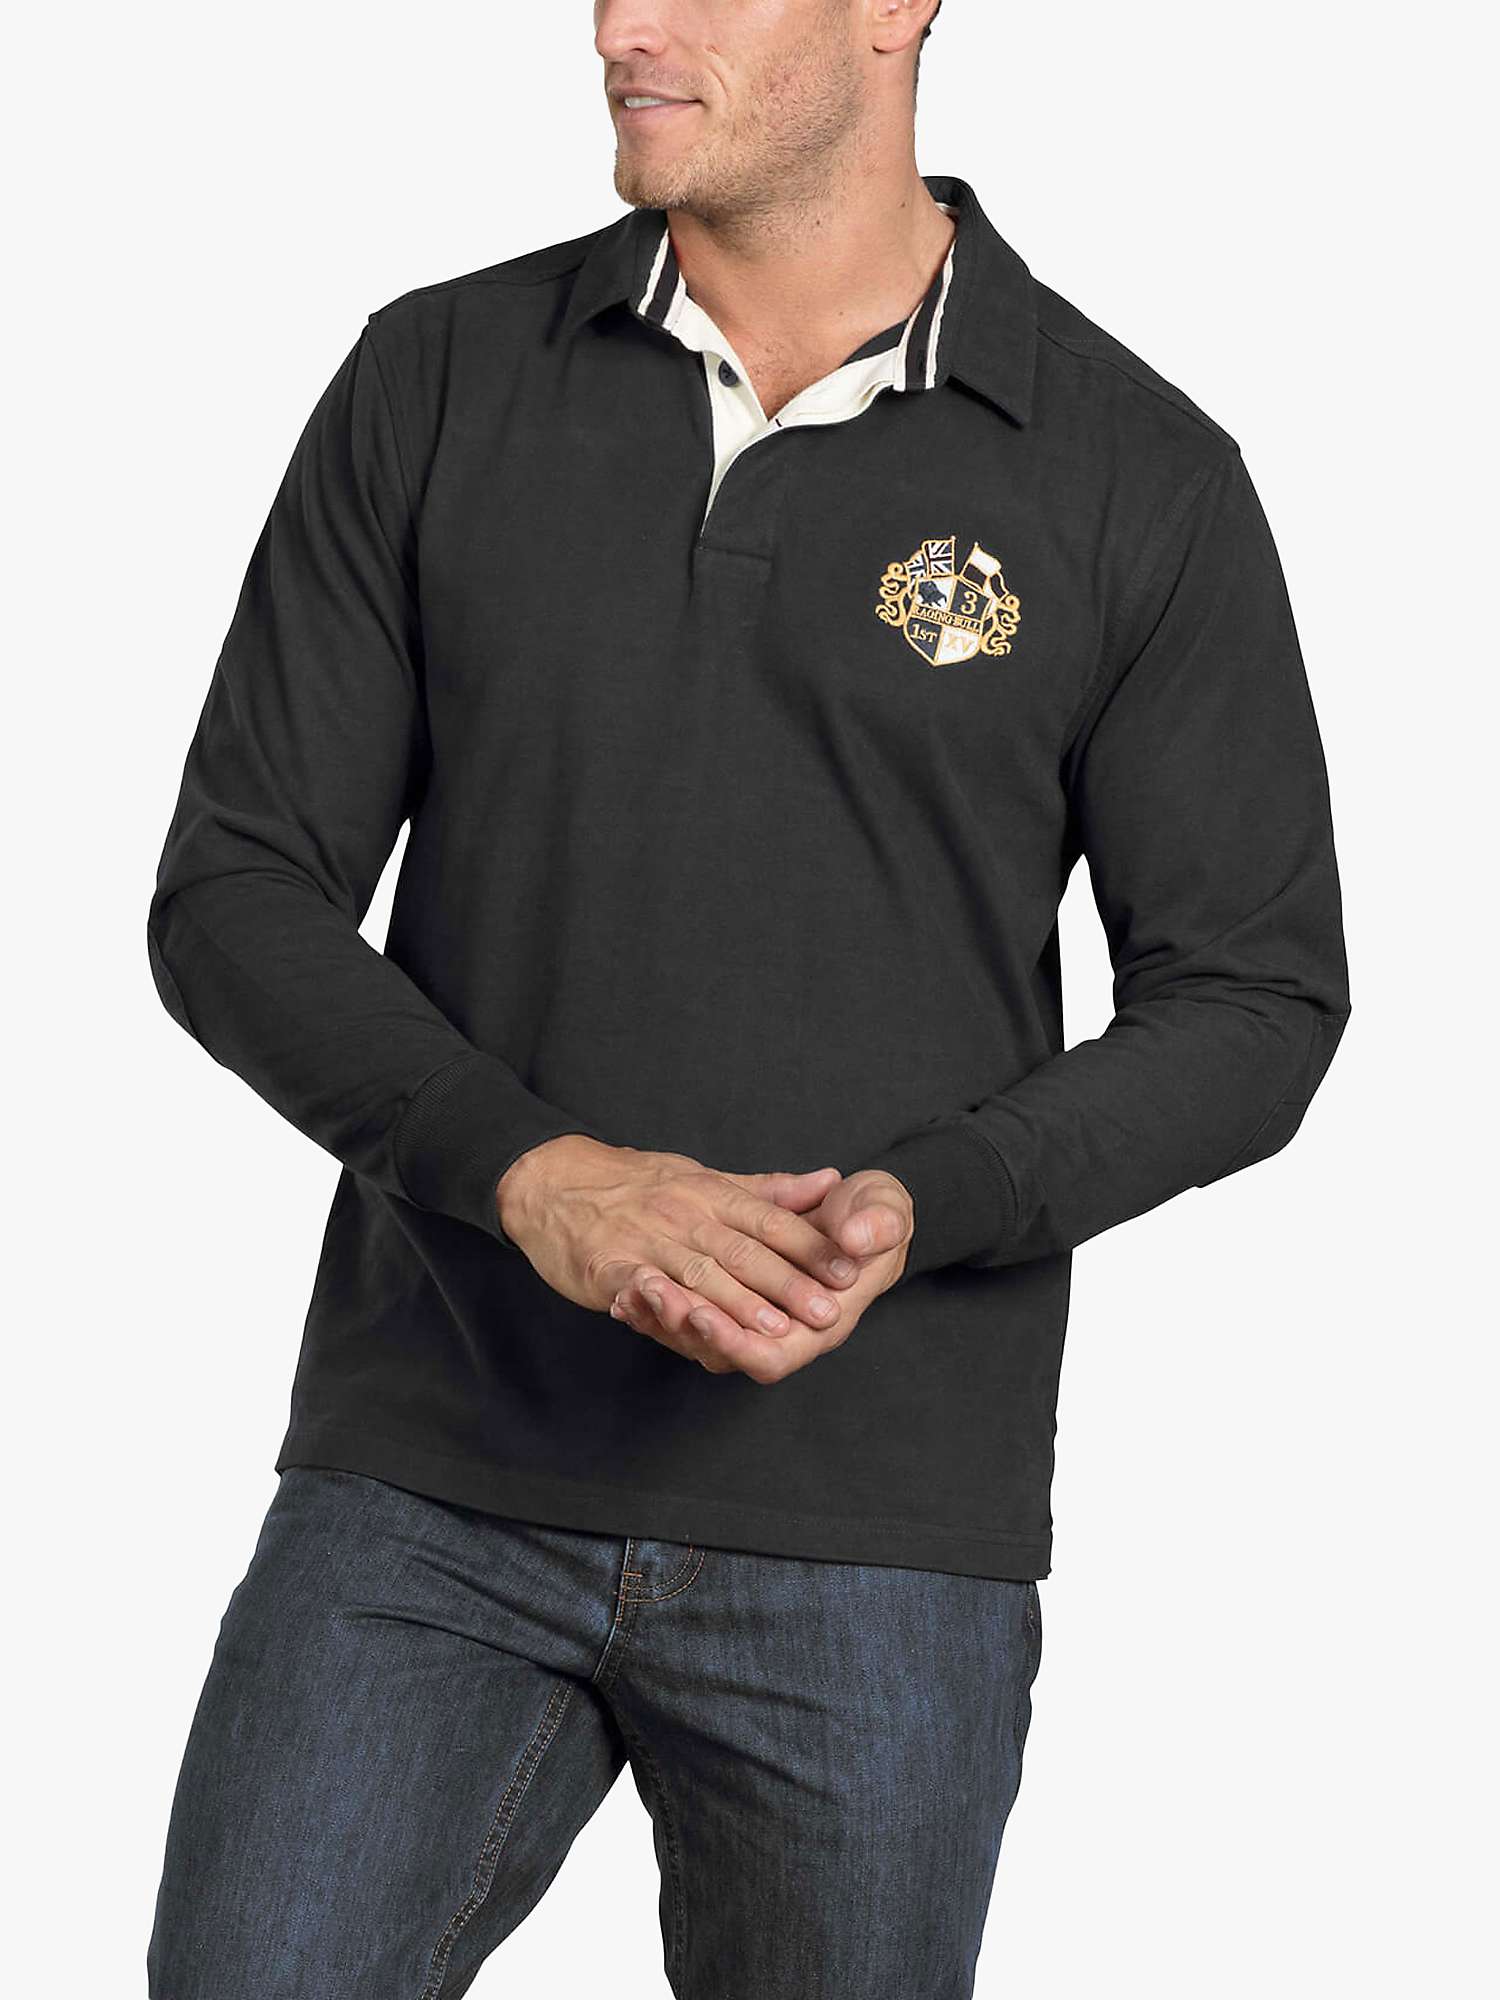 Buy Raging Bull Signature Rugby Polo Shirt, Black Online at johnlewis.com